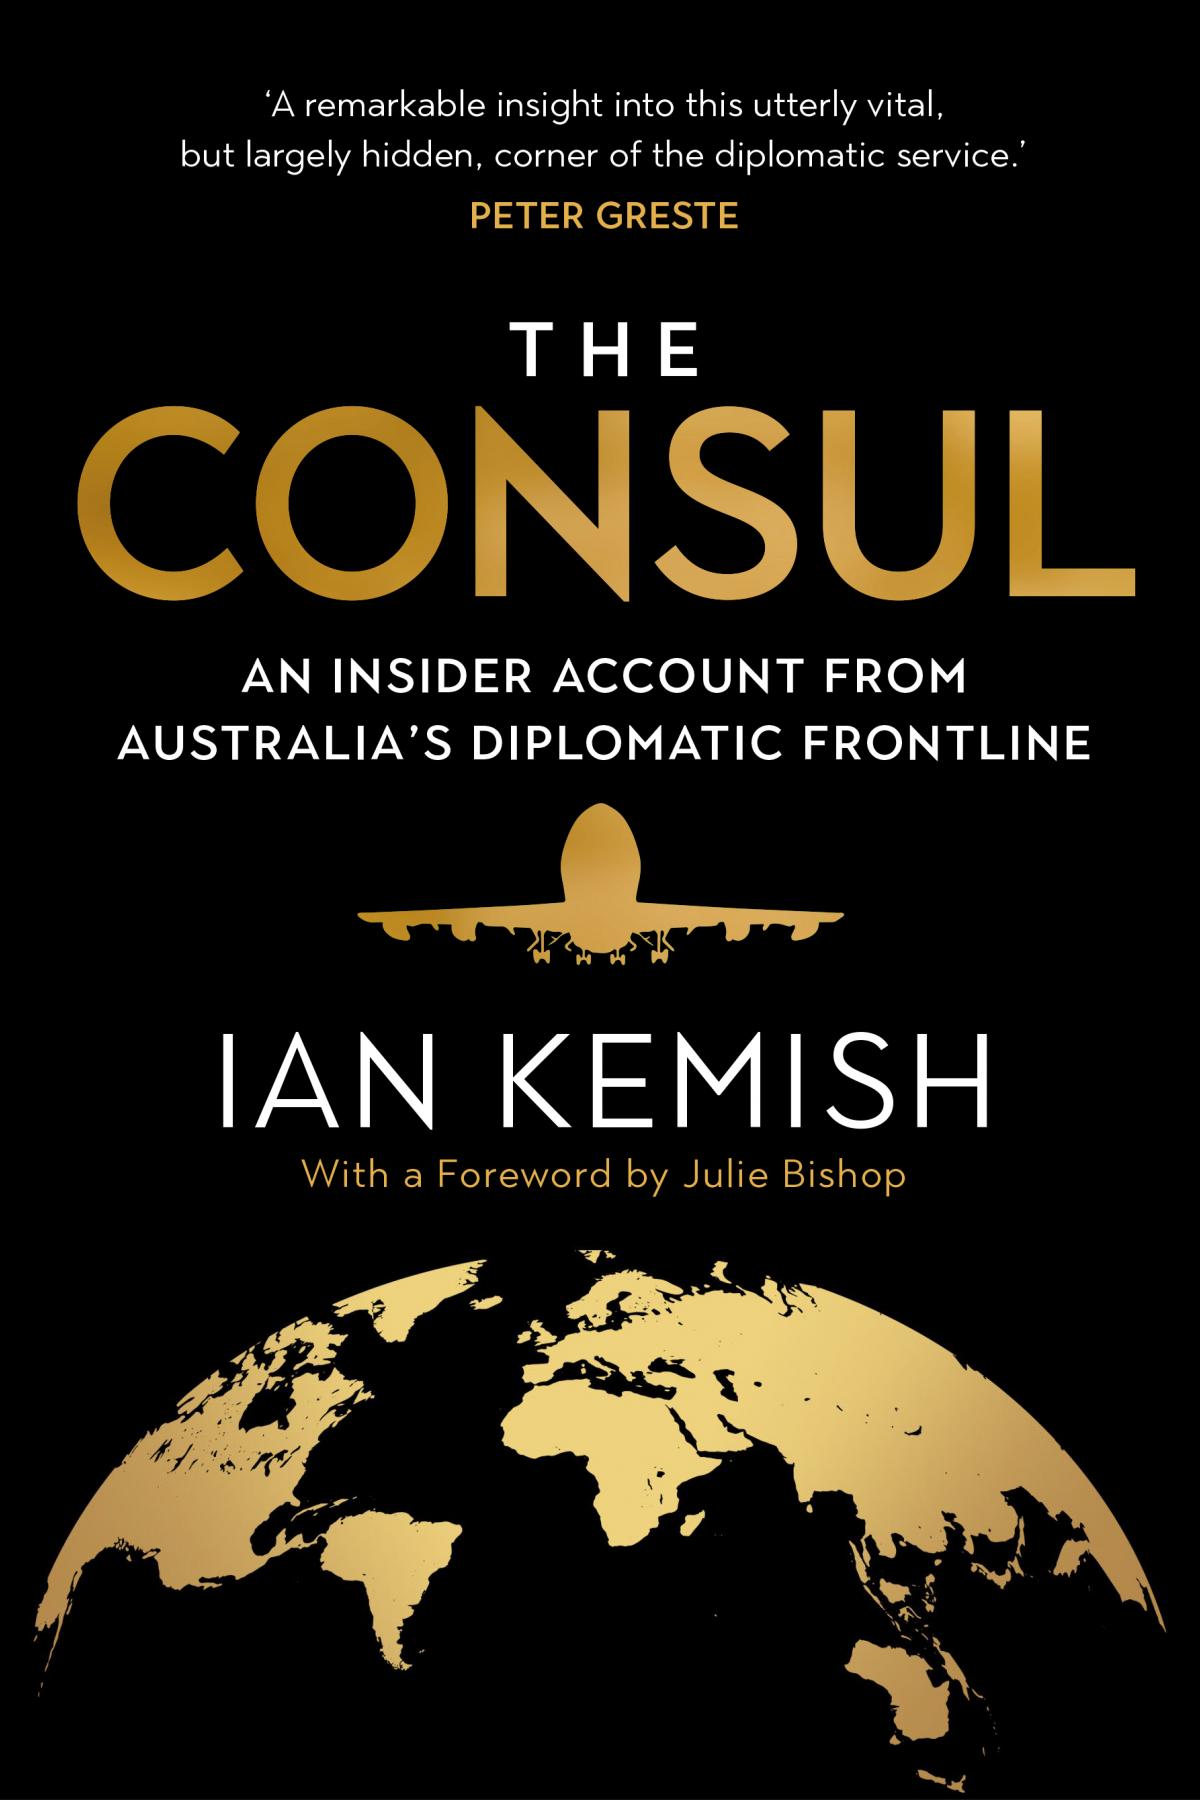 The Consul Book cover by Ian Kemish featuring a plane flying over a golden globe